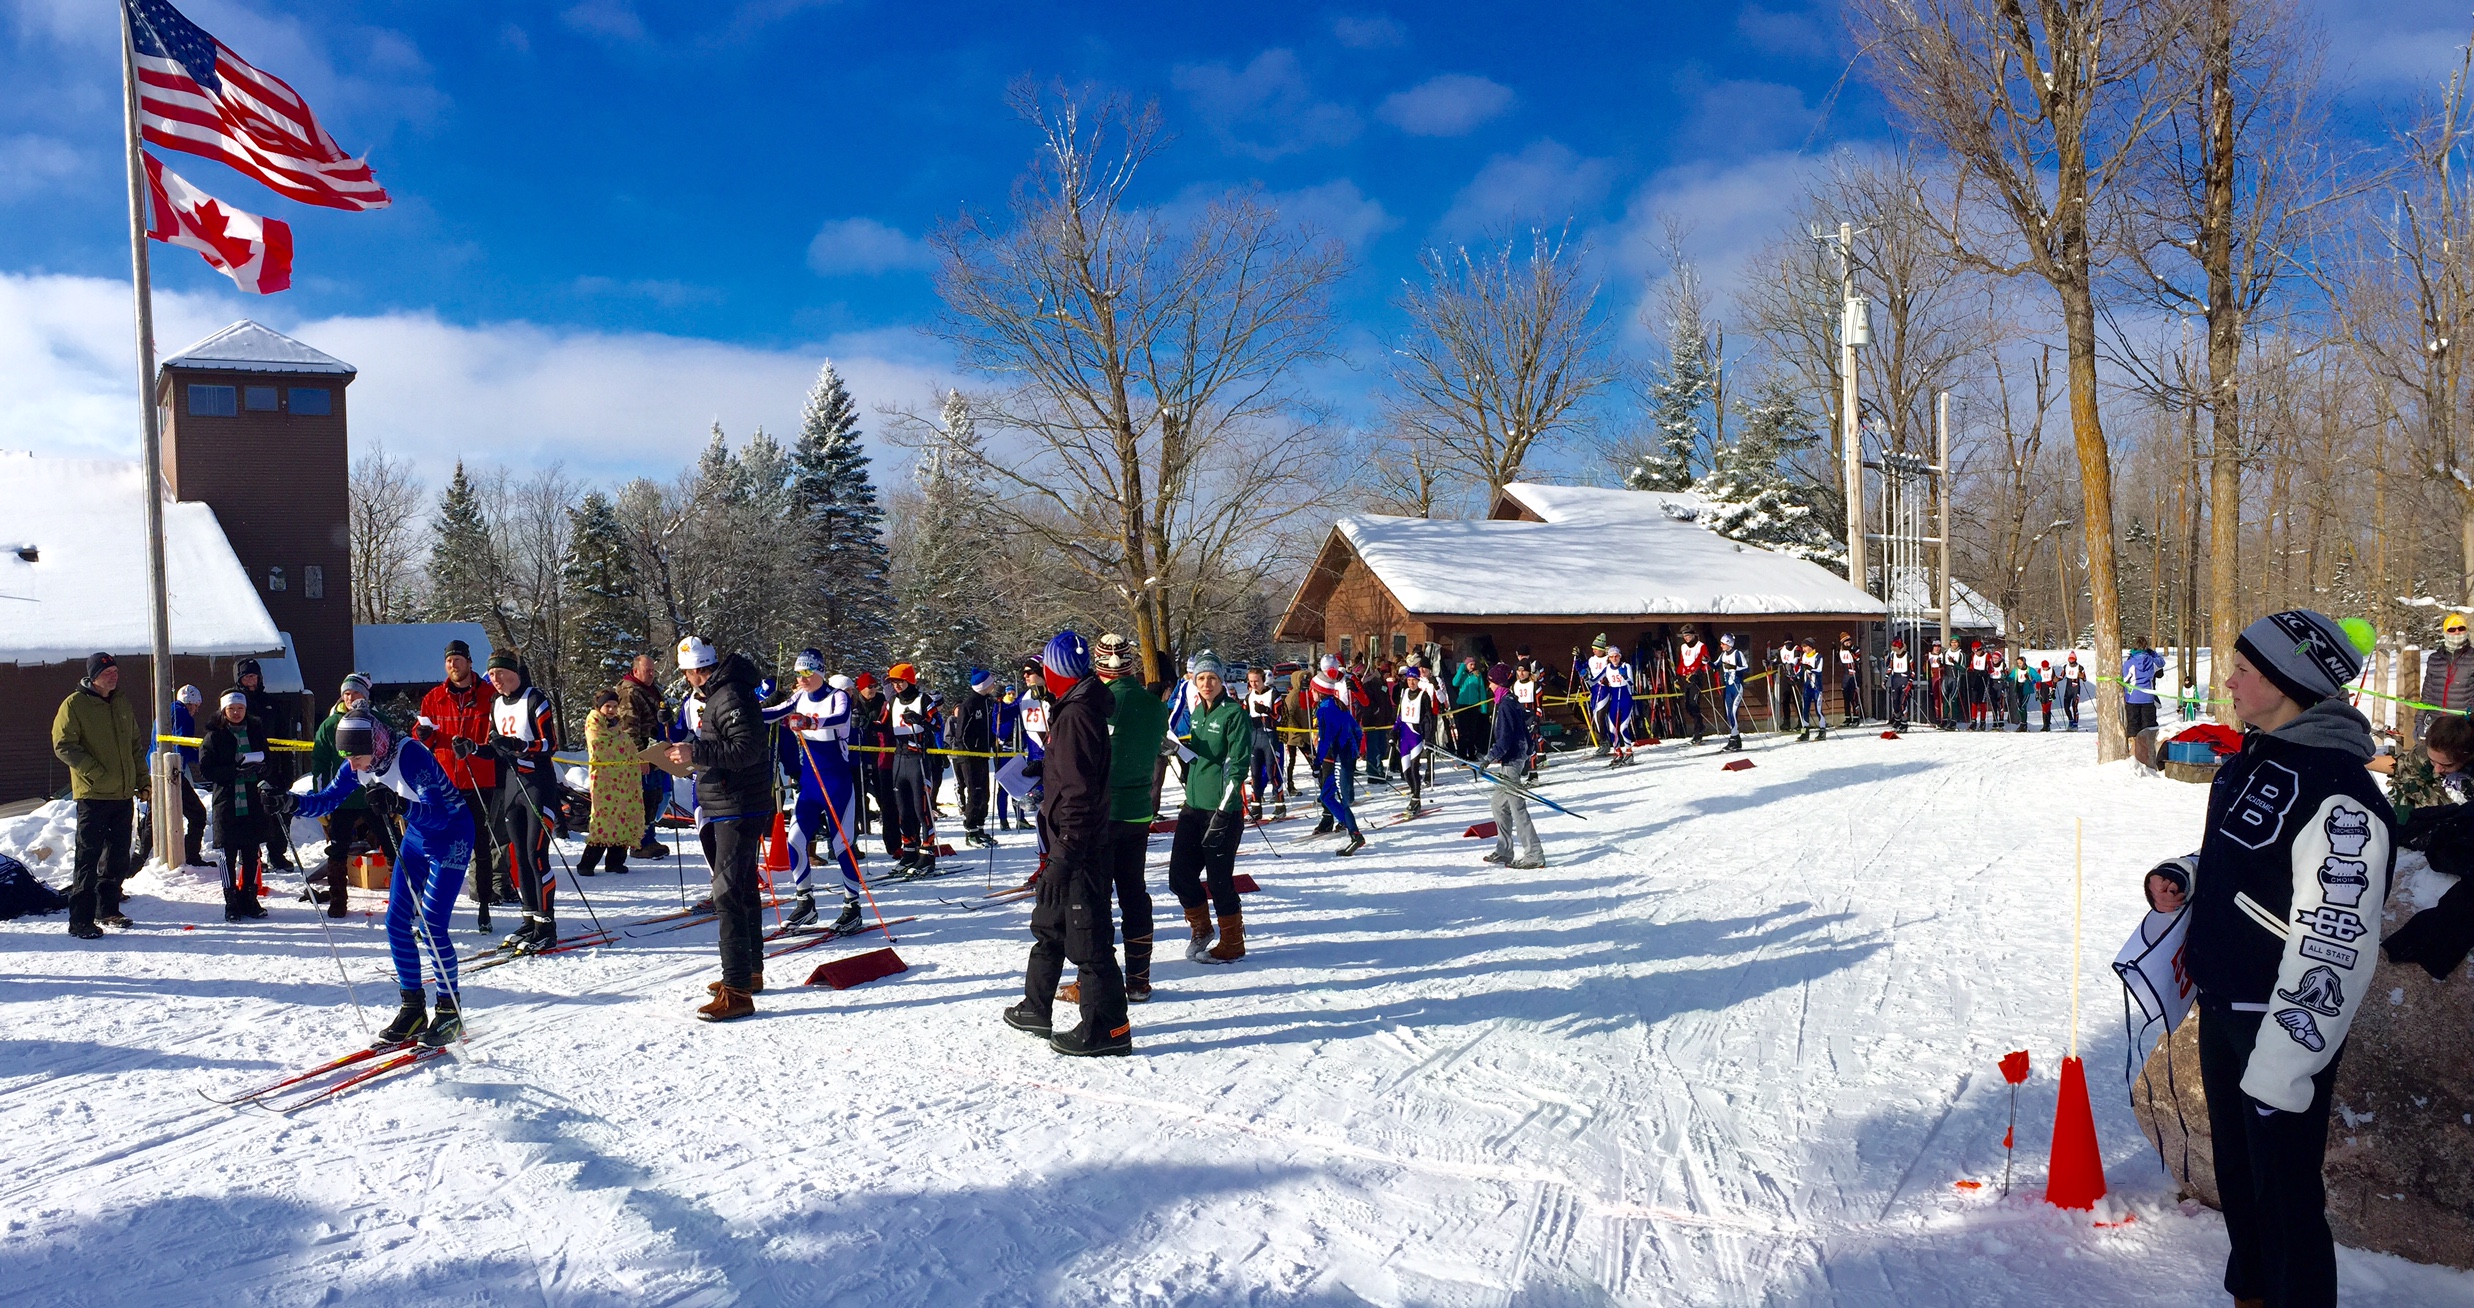 Skiers lined up for the classic pursuit, January 22nd, 2015.